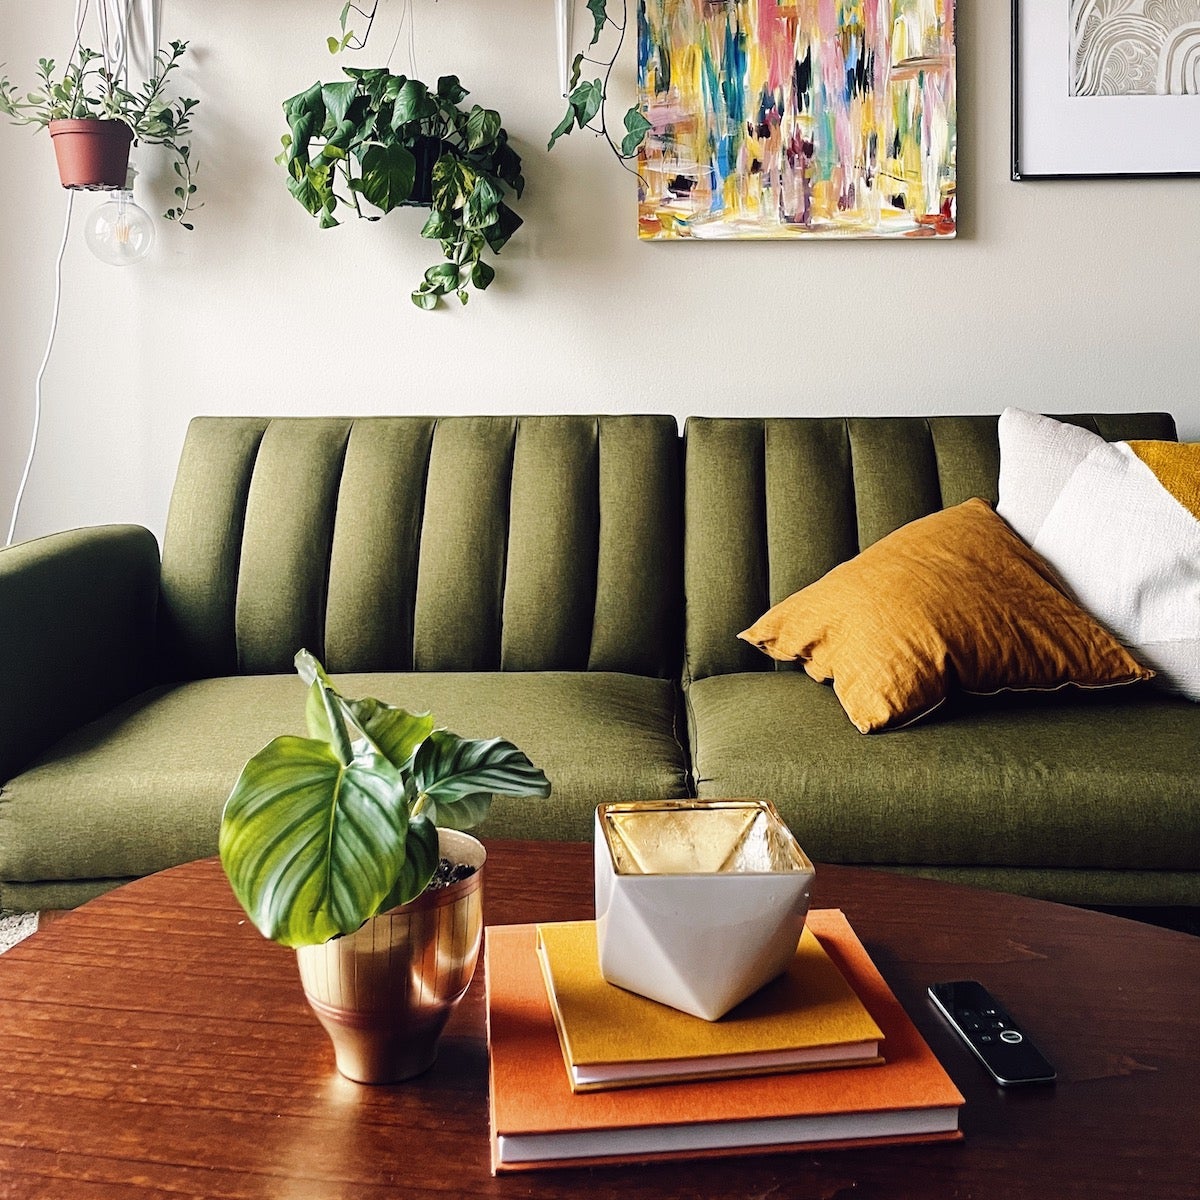 A colorful living with a green couch, yellow pillows, hanging plants and art, and then colorful coffee table books.